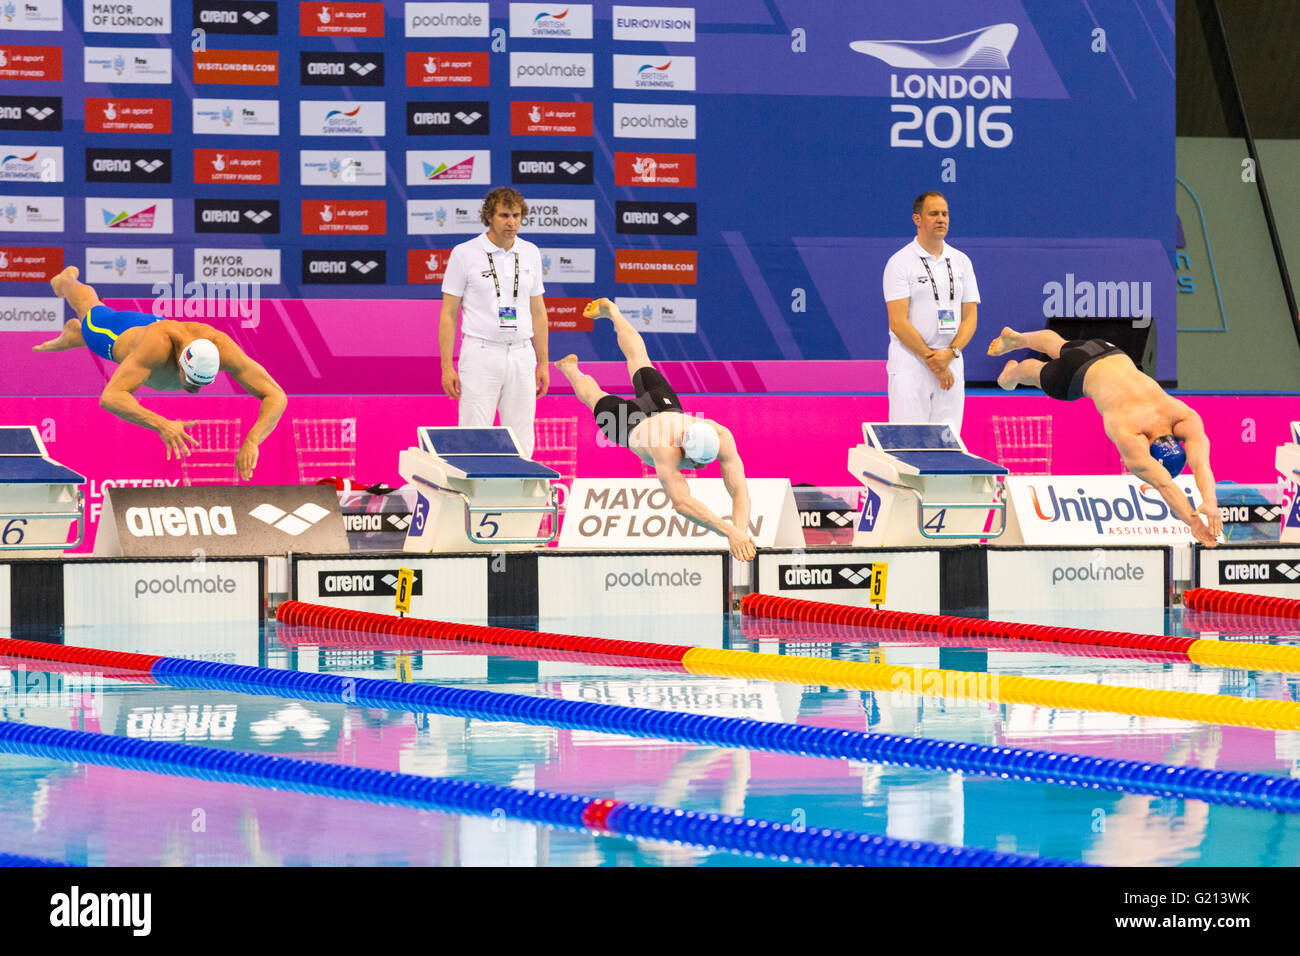 Aquatics Centre, London, UK, 21st May 2016. European Swimming Championships. Men's 50m breaststroke final.  The two British swimmers, Peaty and Murdoch are off to a good start. British favourite Adam Peaty wins the gold medal in 26.66, with 2nd British swimmer Ross Murdoch taking Bronze in 27.31, whilst silver goes to Slovenian Peter John Stevens in 27.09. Credit:  Imageplotter News and Sports/Alamy Live News Stock Photo